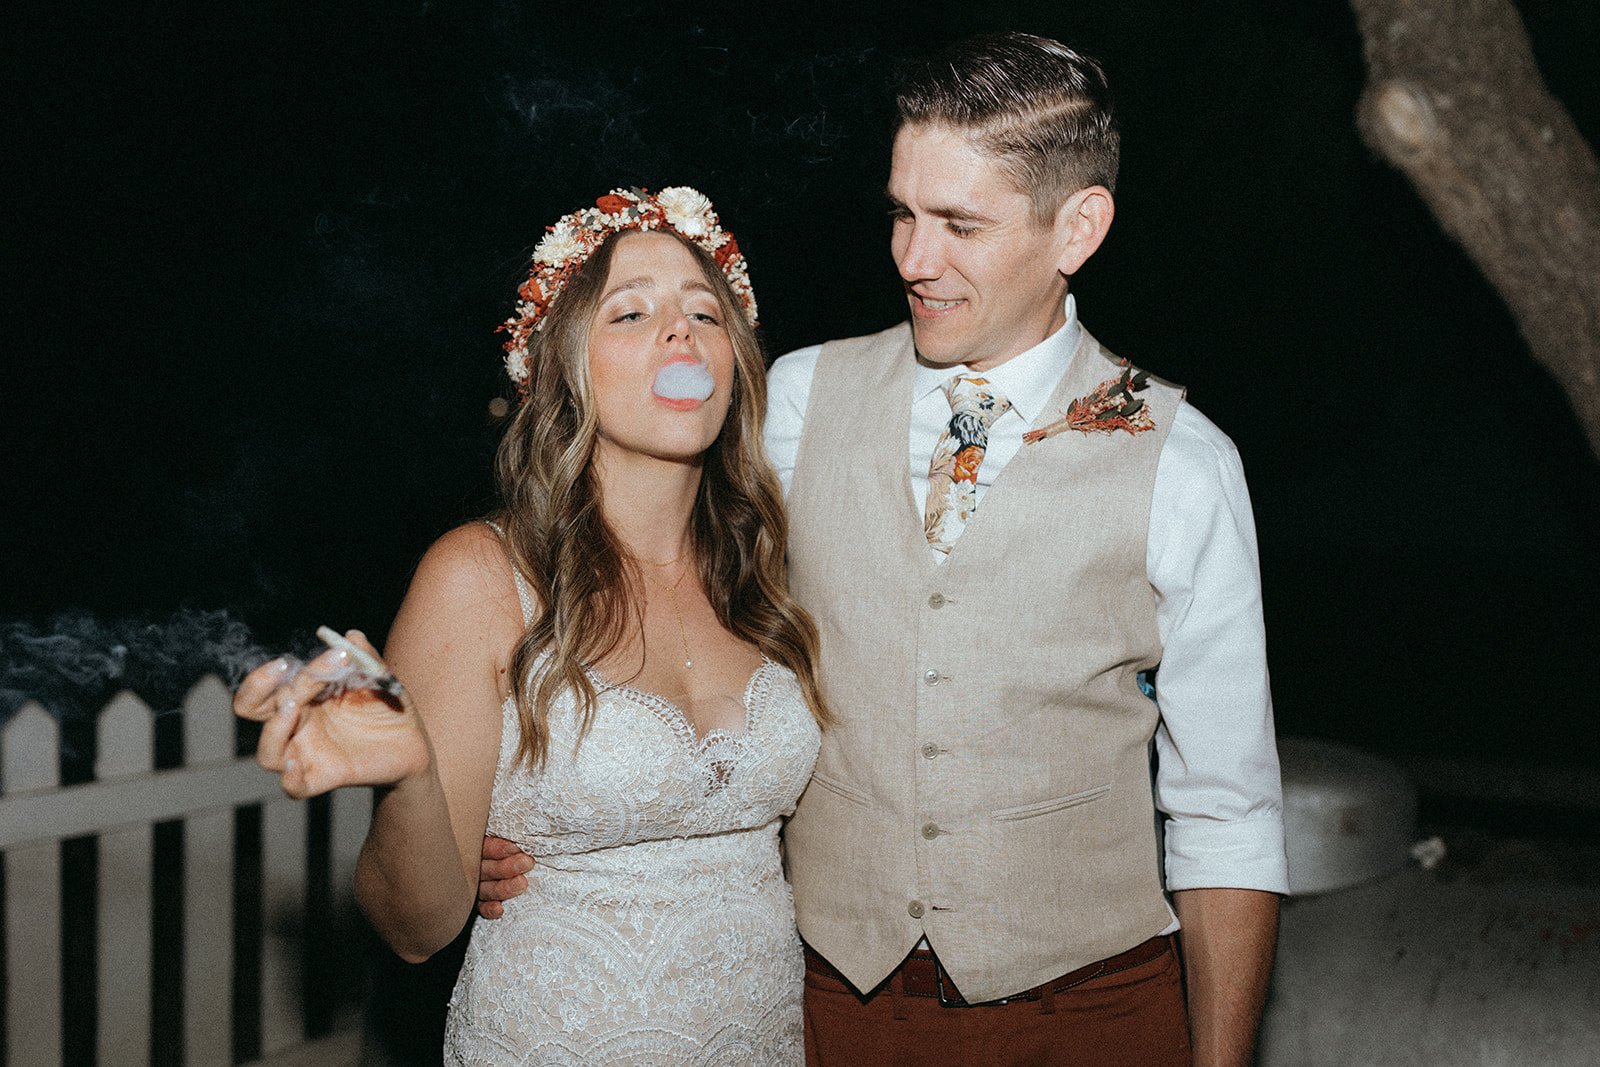 The couple ended the night by smoking a joint together